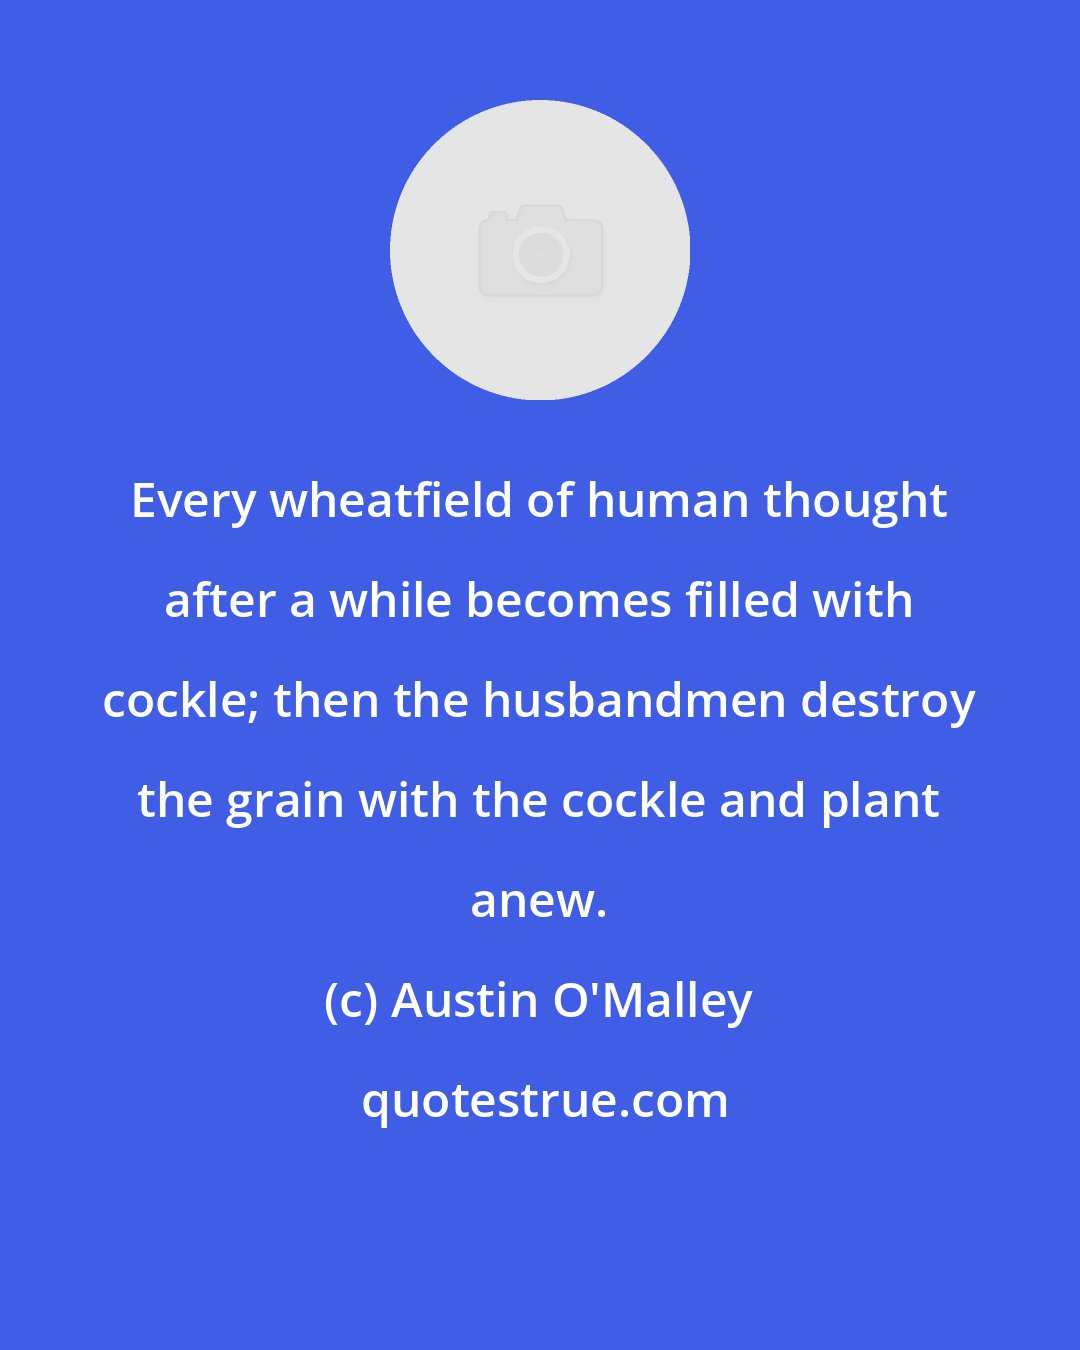 Austin O'Malley: Every wheatfield of human thought after a while becomes filled with cockle; then the husbandmen destroy the grain with the cockle and plant anew.